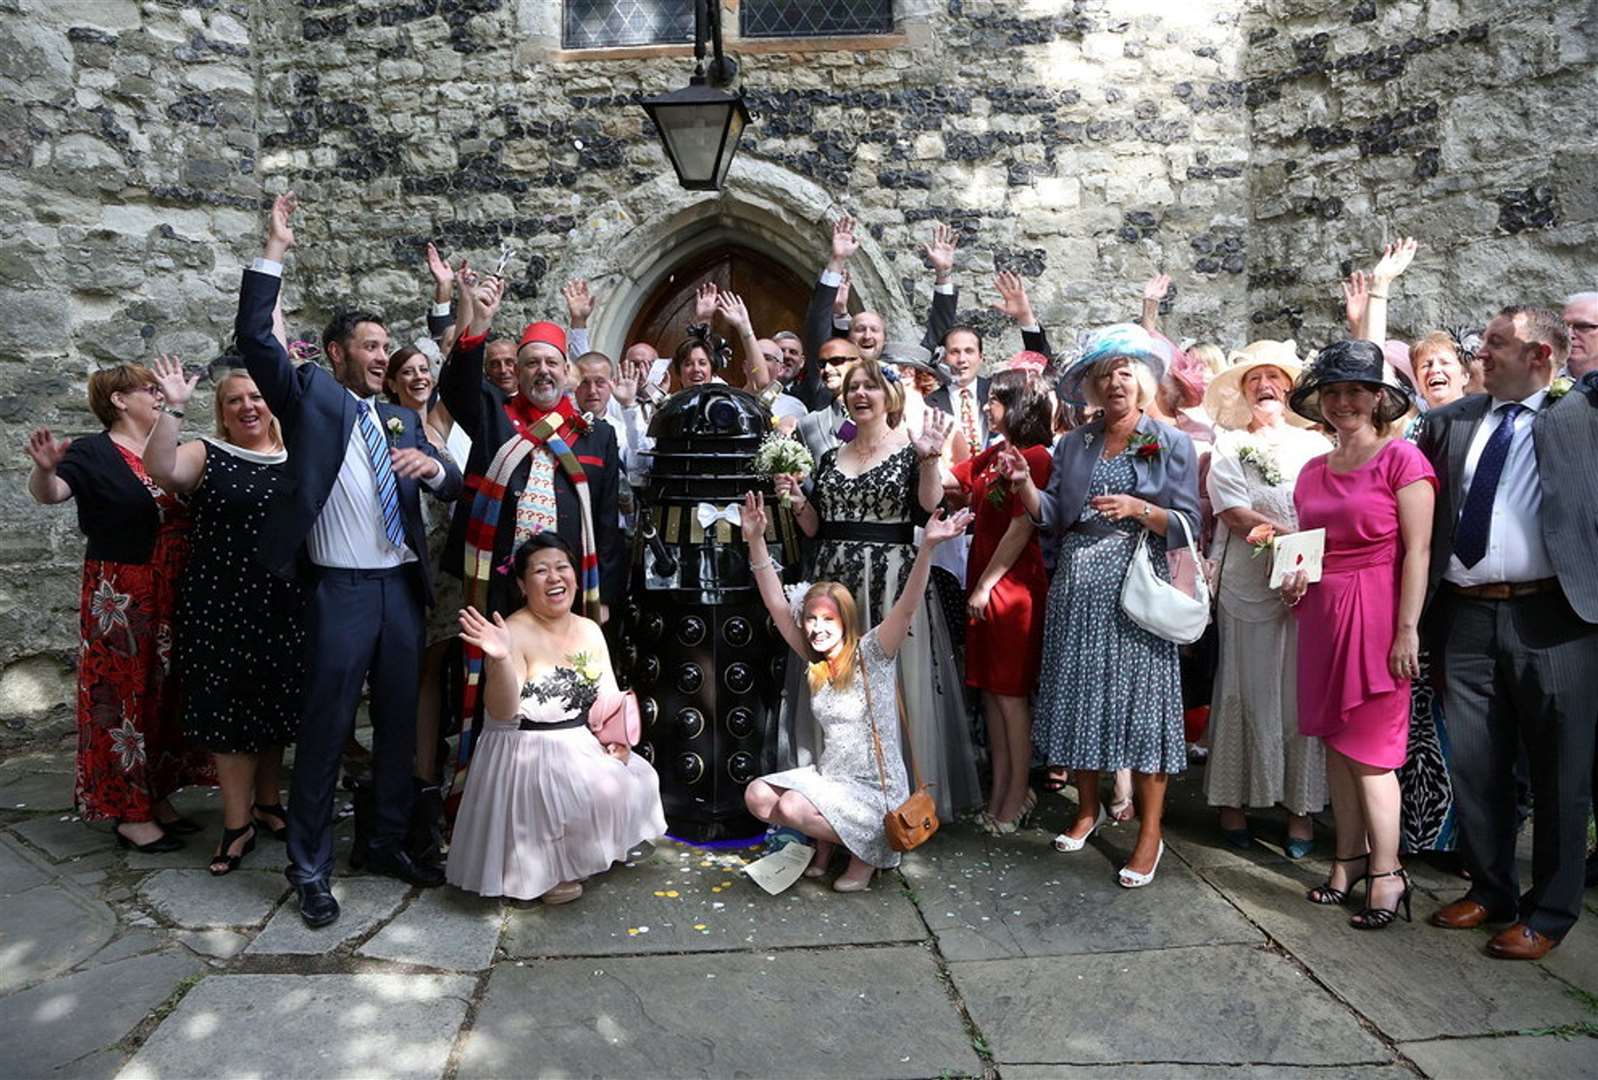 Paul and Joanne Seymour renewed their vowels in 2014 with the help of a Dalek. Picture: South West News Service (16052500)